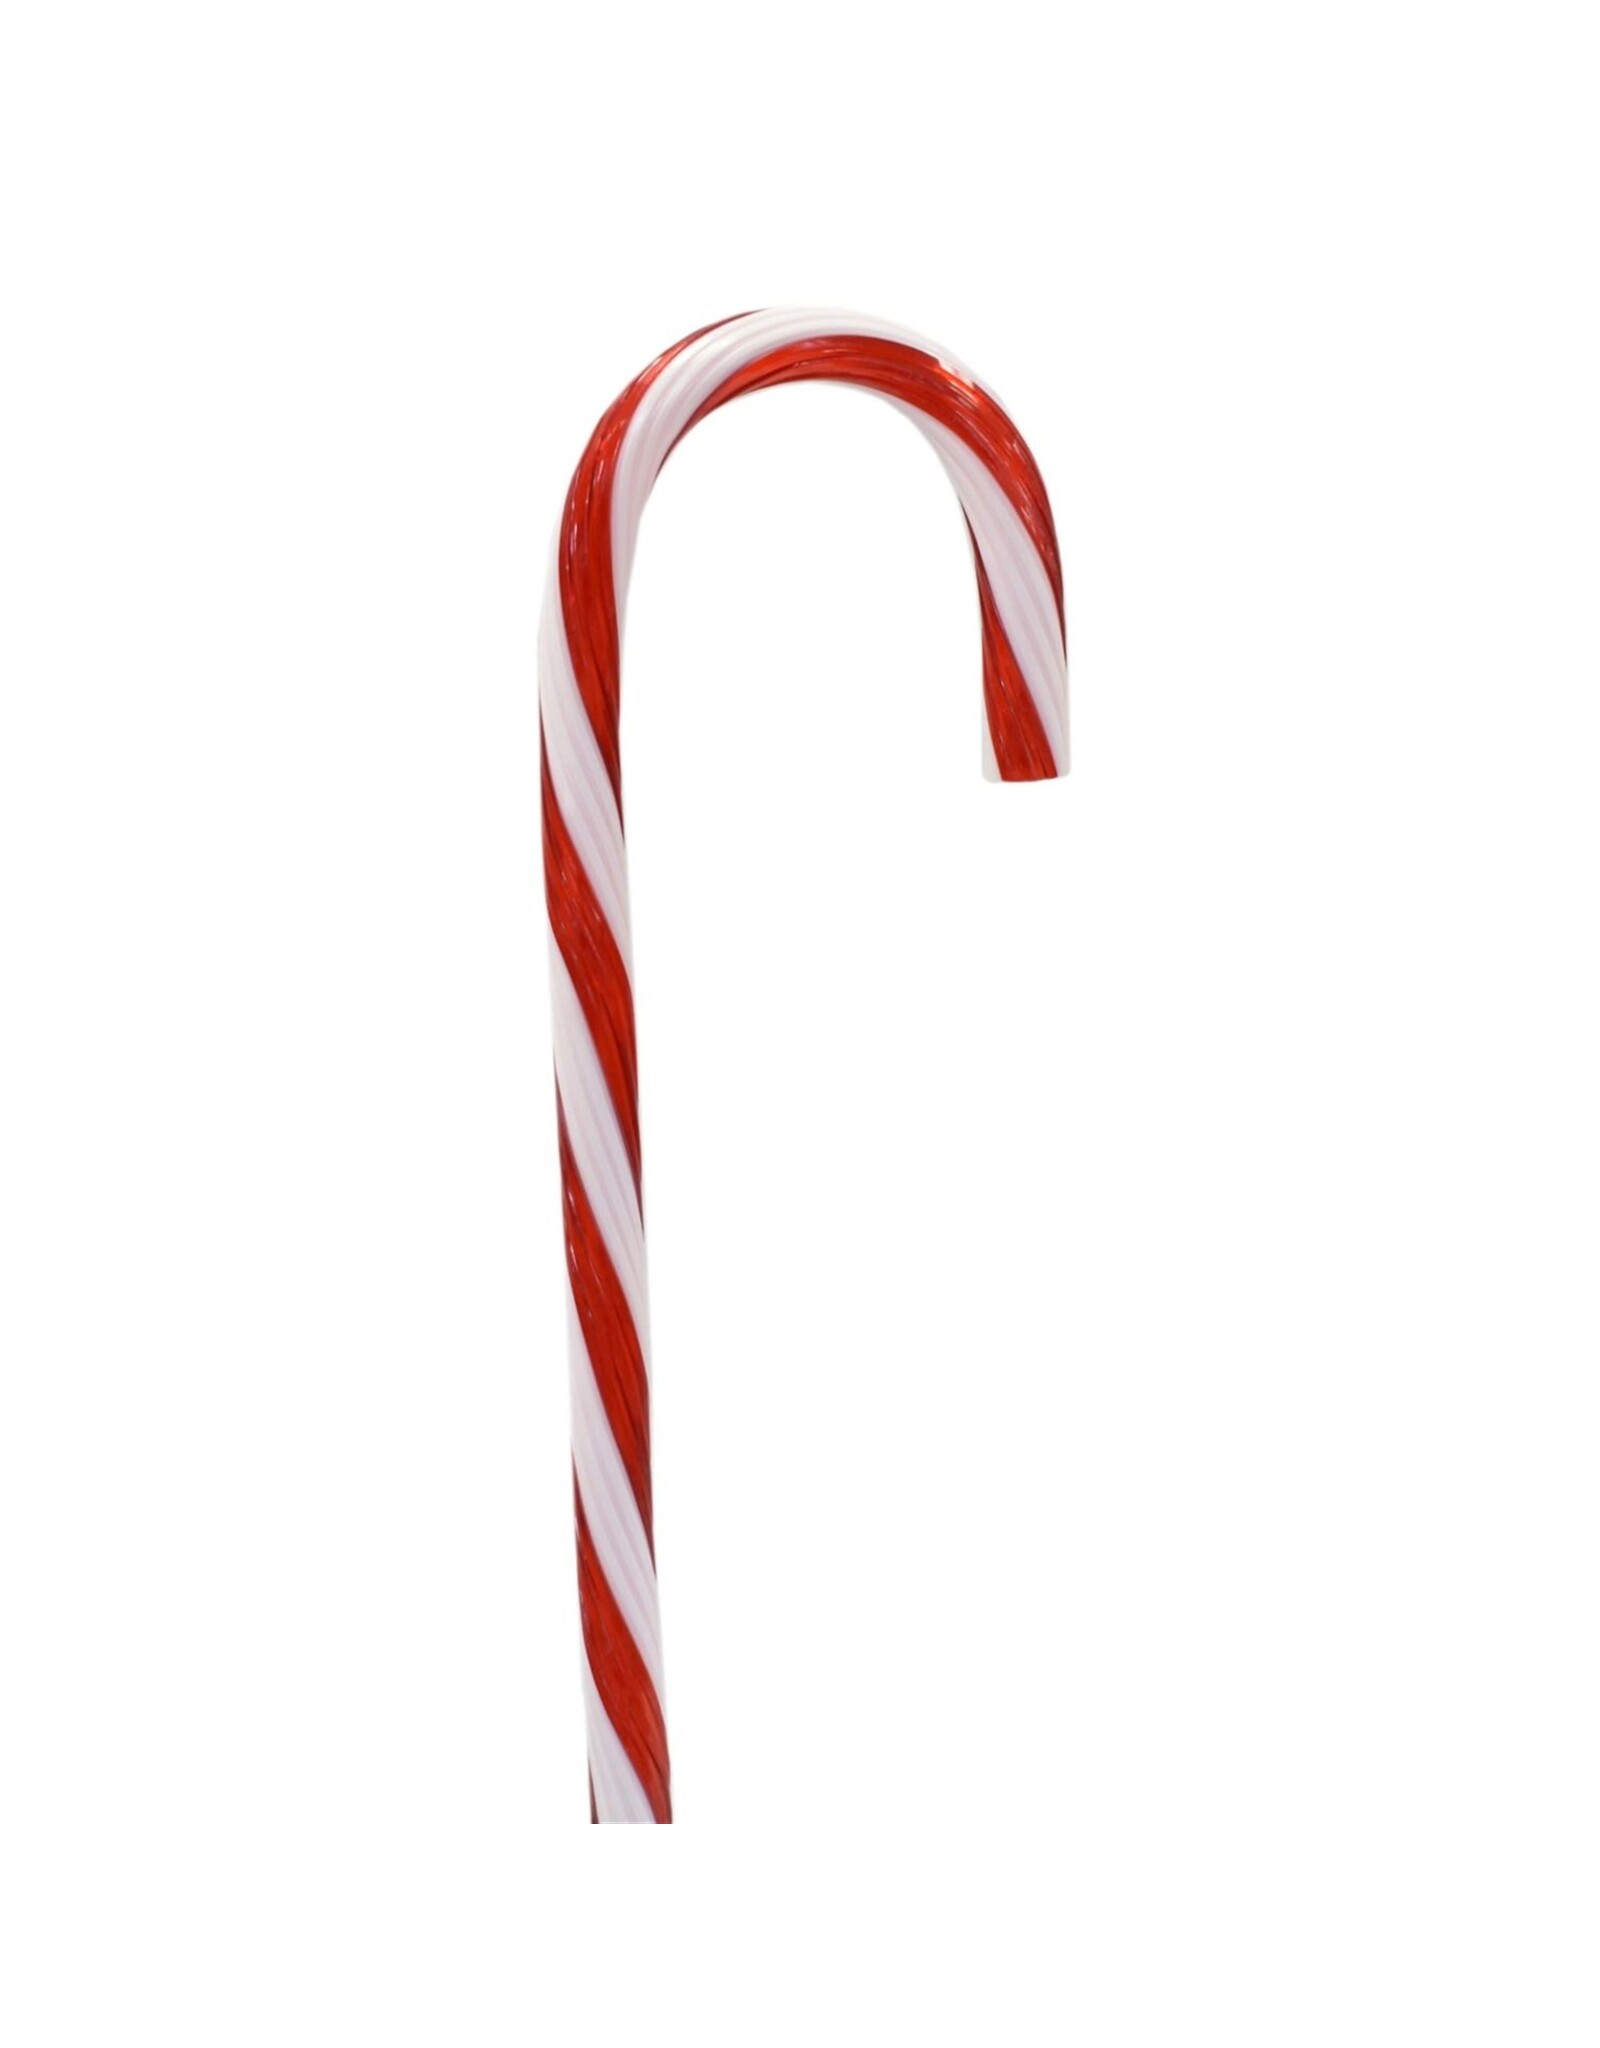 David Christophers Red White Candy Cane Ornament Decoration 30 Inch